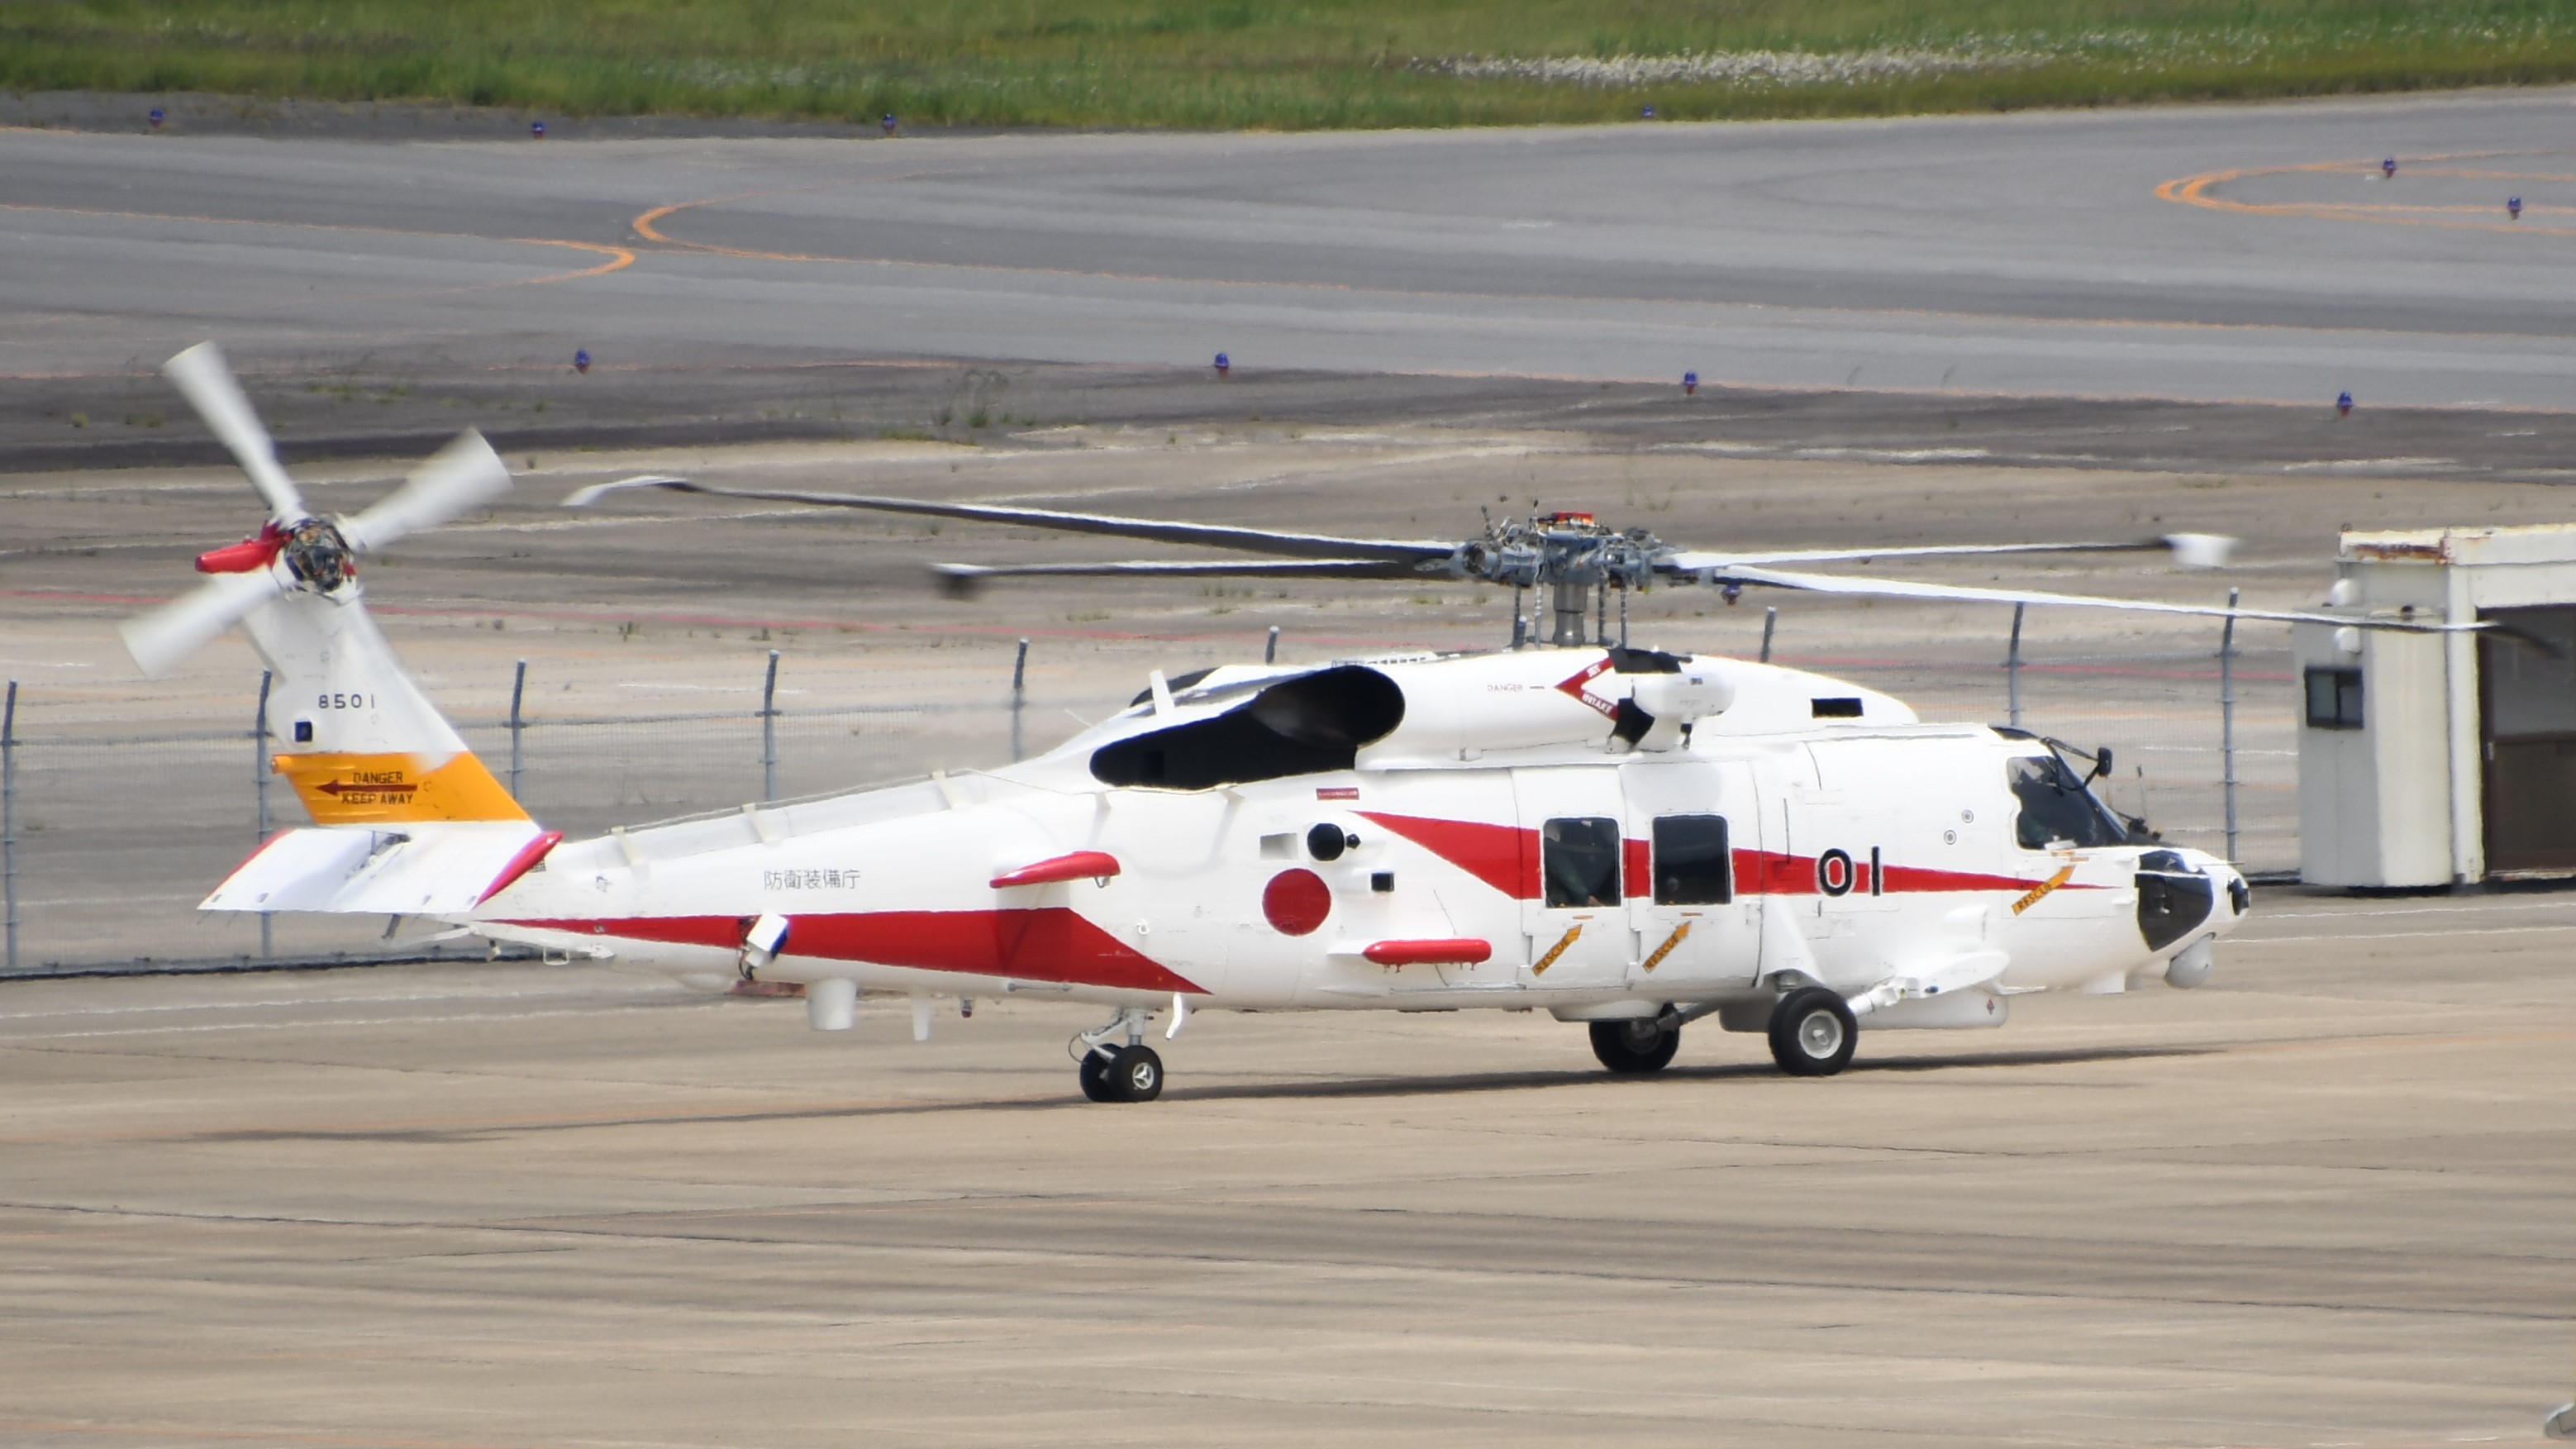 File:ALTA XSH-60L(8501) taxiing at the Mitsubishi Heavy Industries 